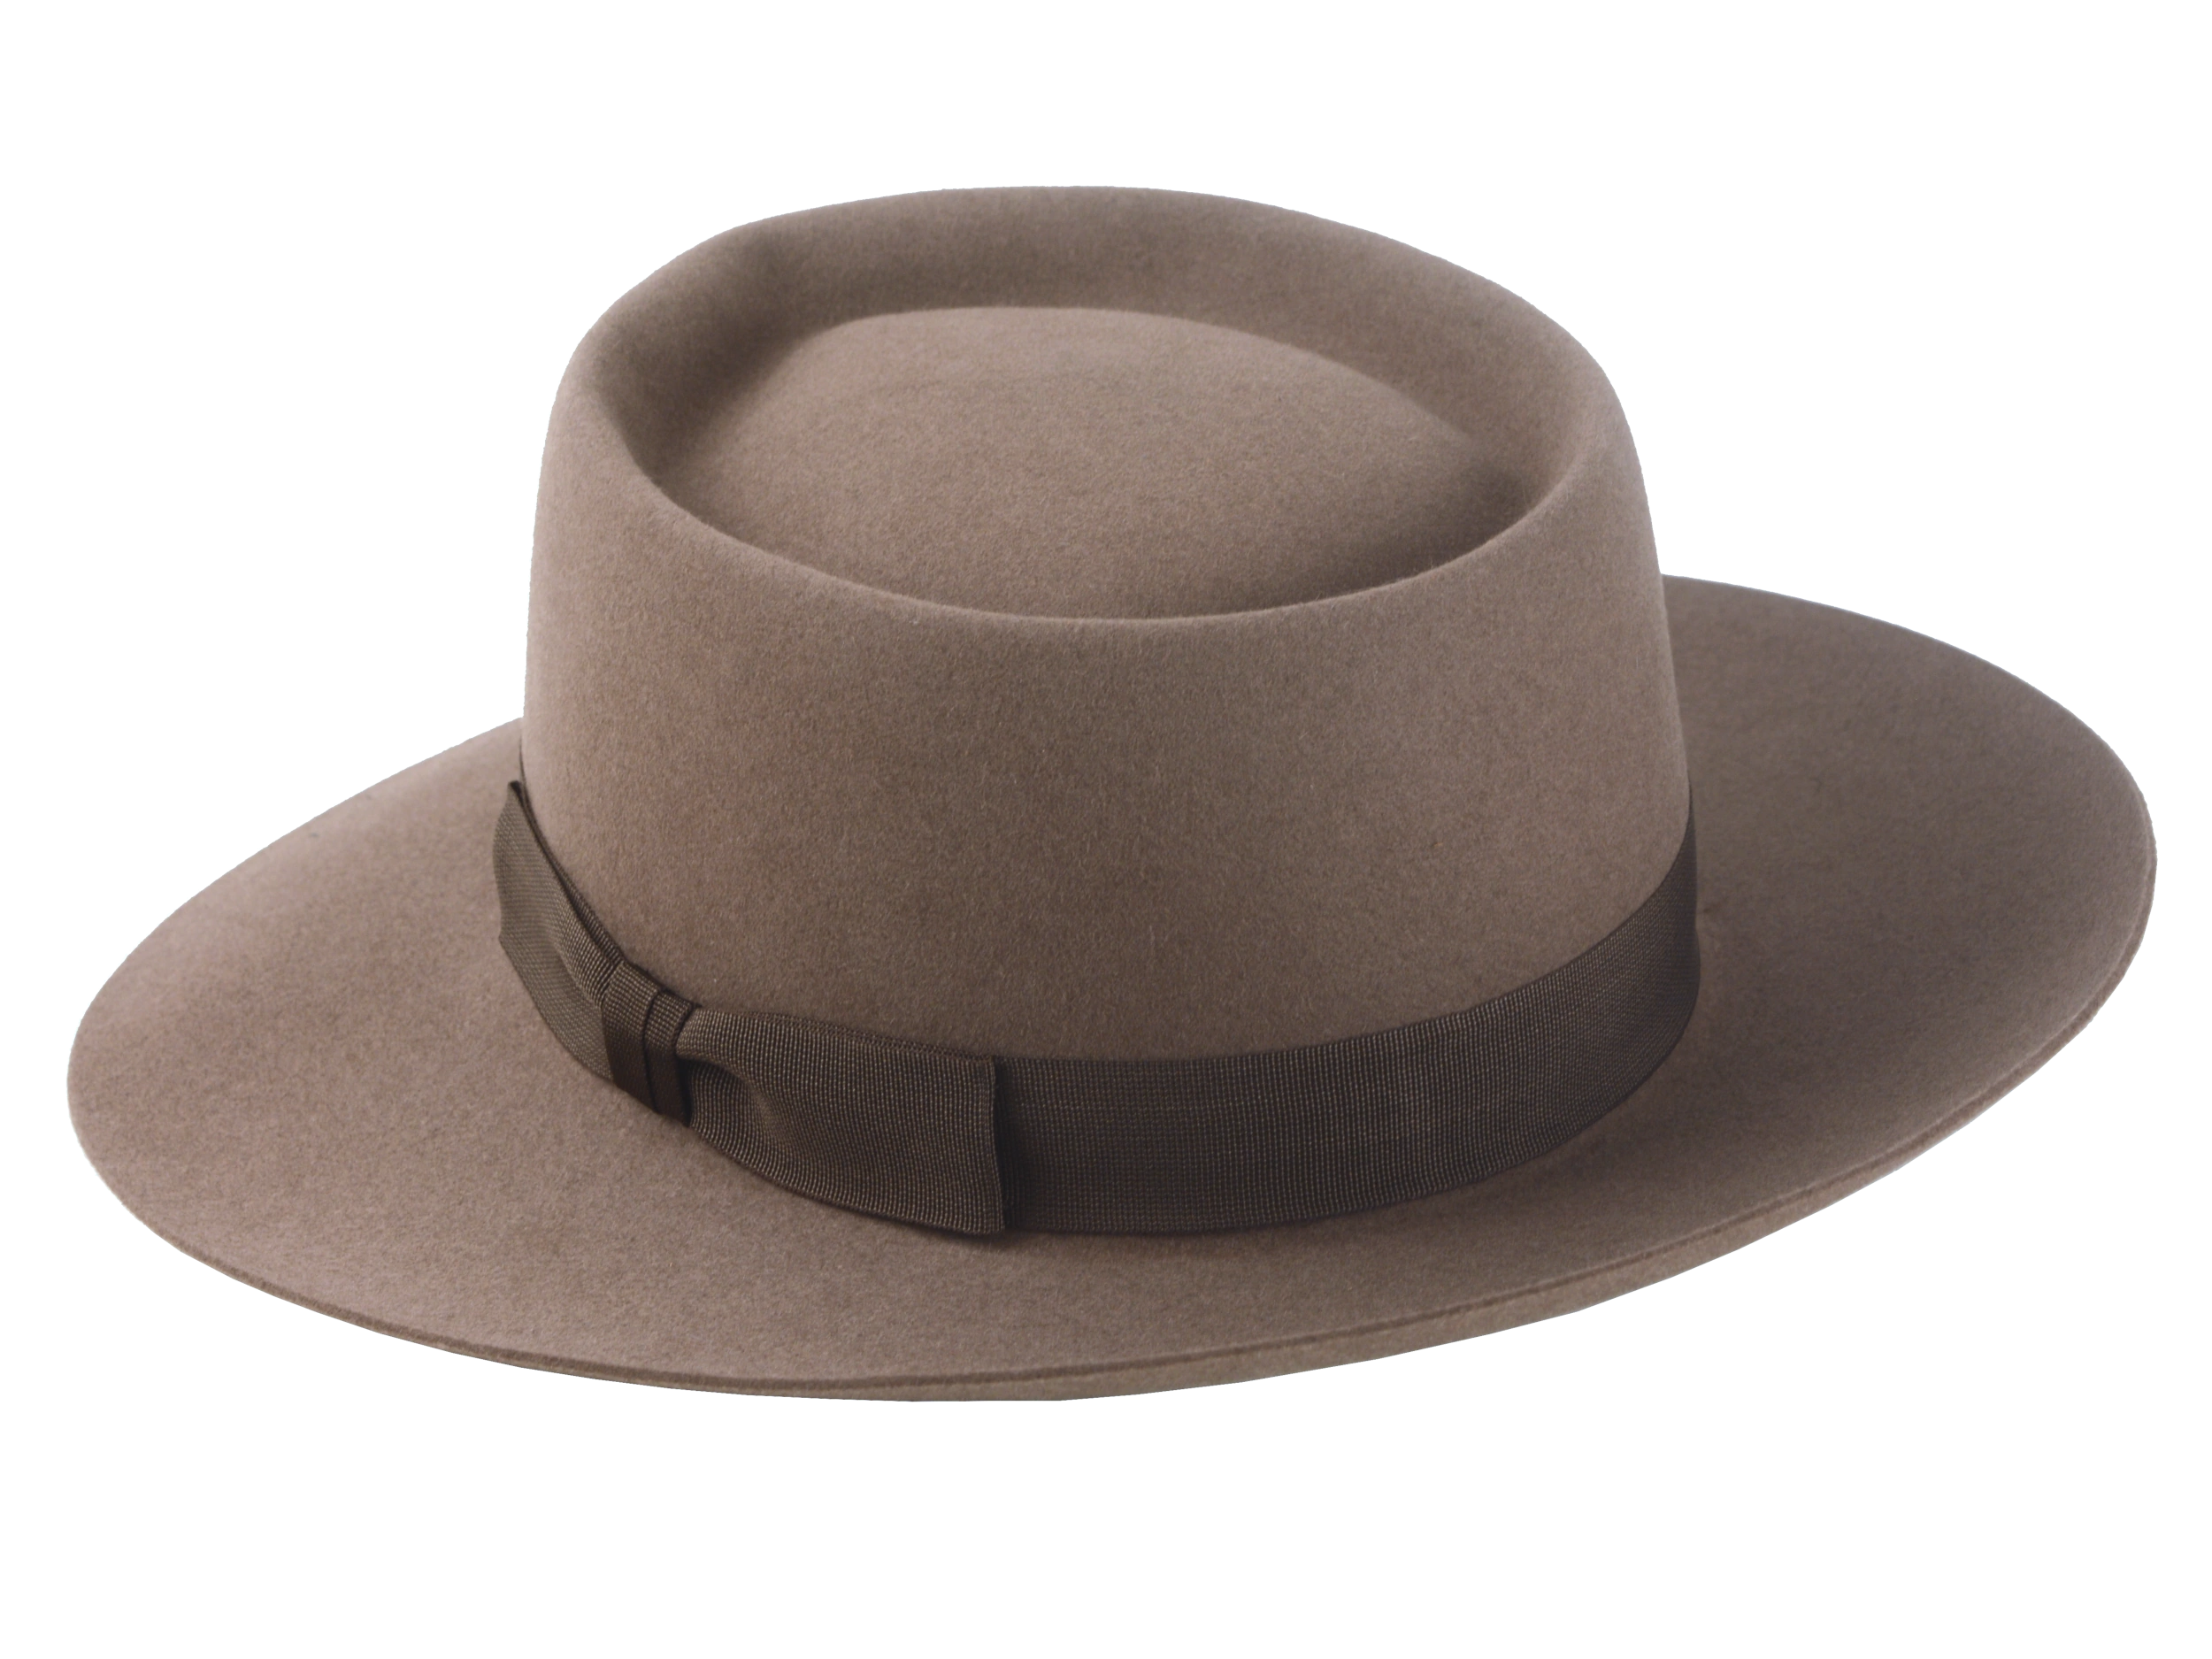 Artisanal wide-brim porkpie hat, named Oppenheimer, in premium beaver felt showcasing the raw edge brim and adorned with a vintage quality ribbon in pecan color against the coffee-hued backdrop of the hat body 3